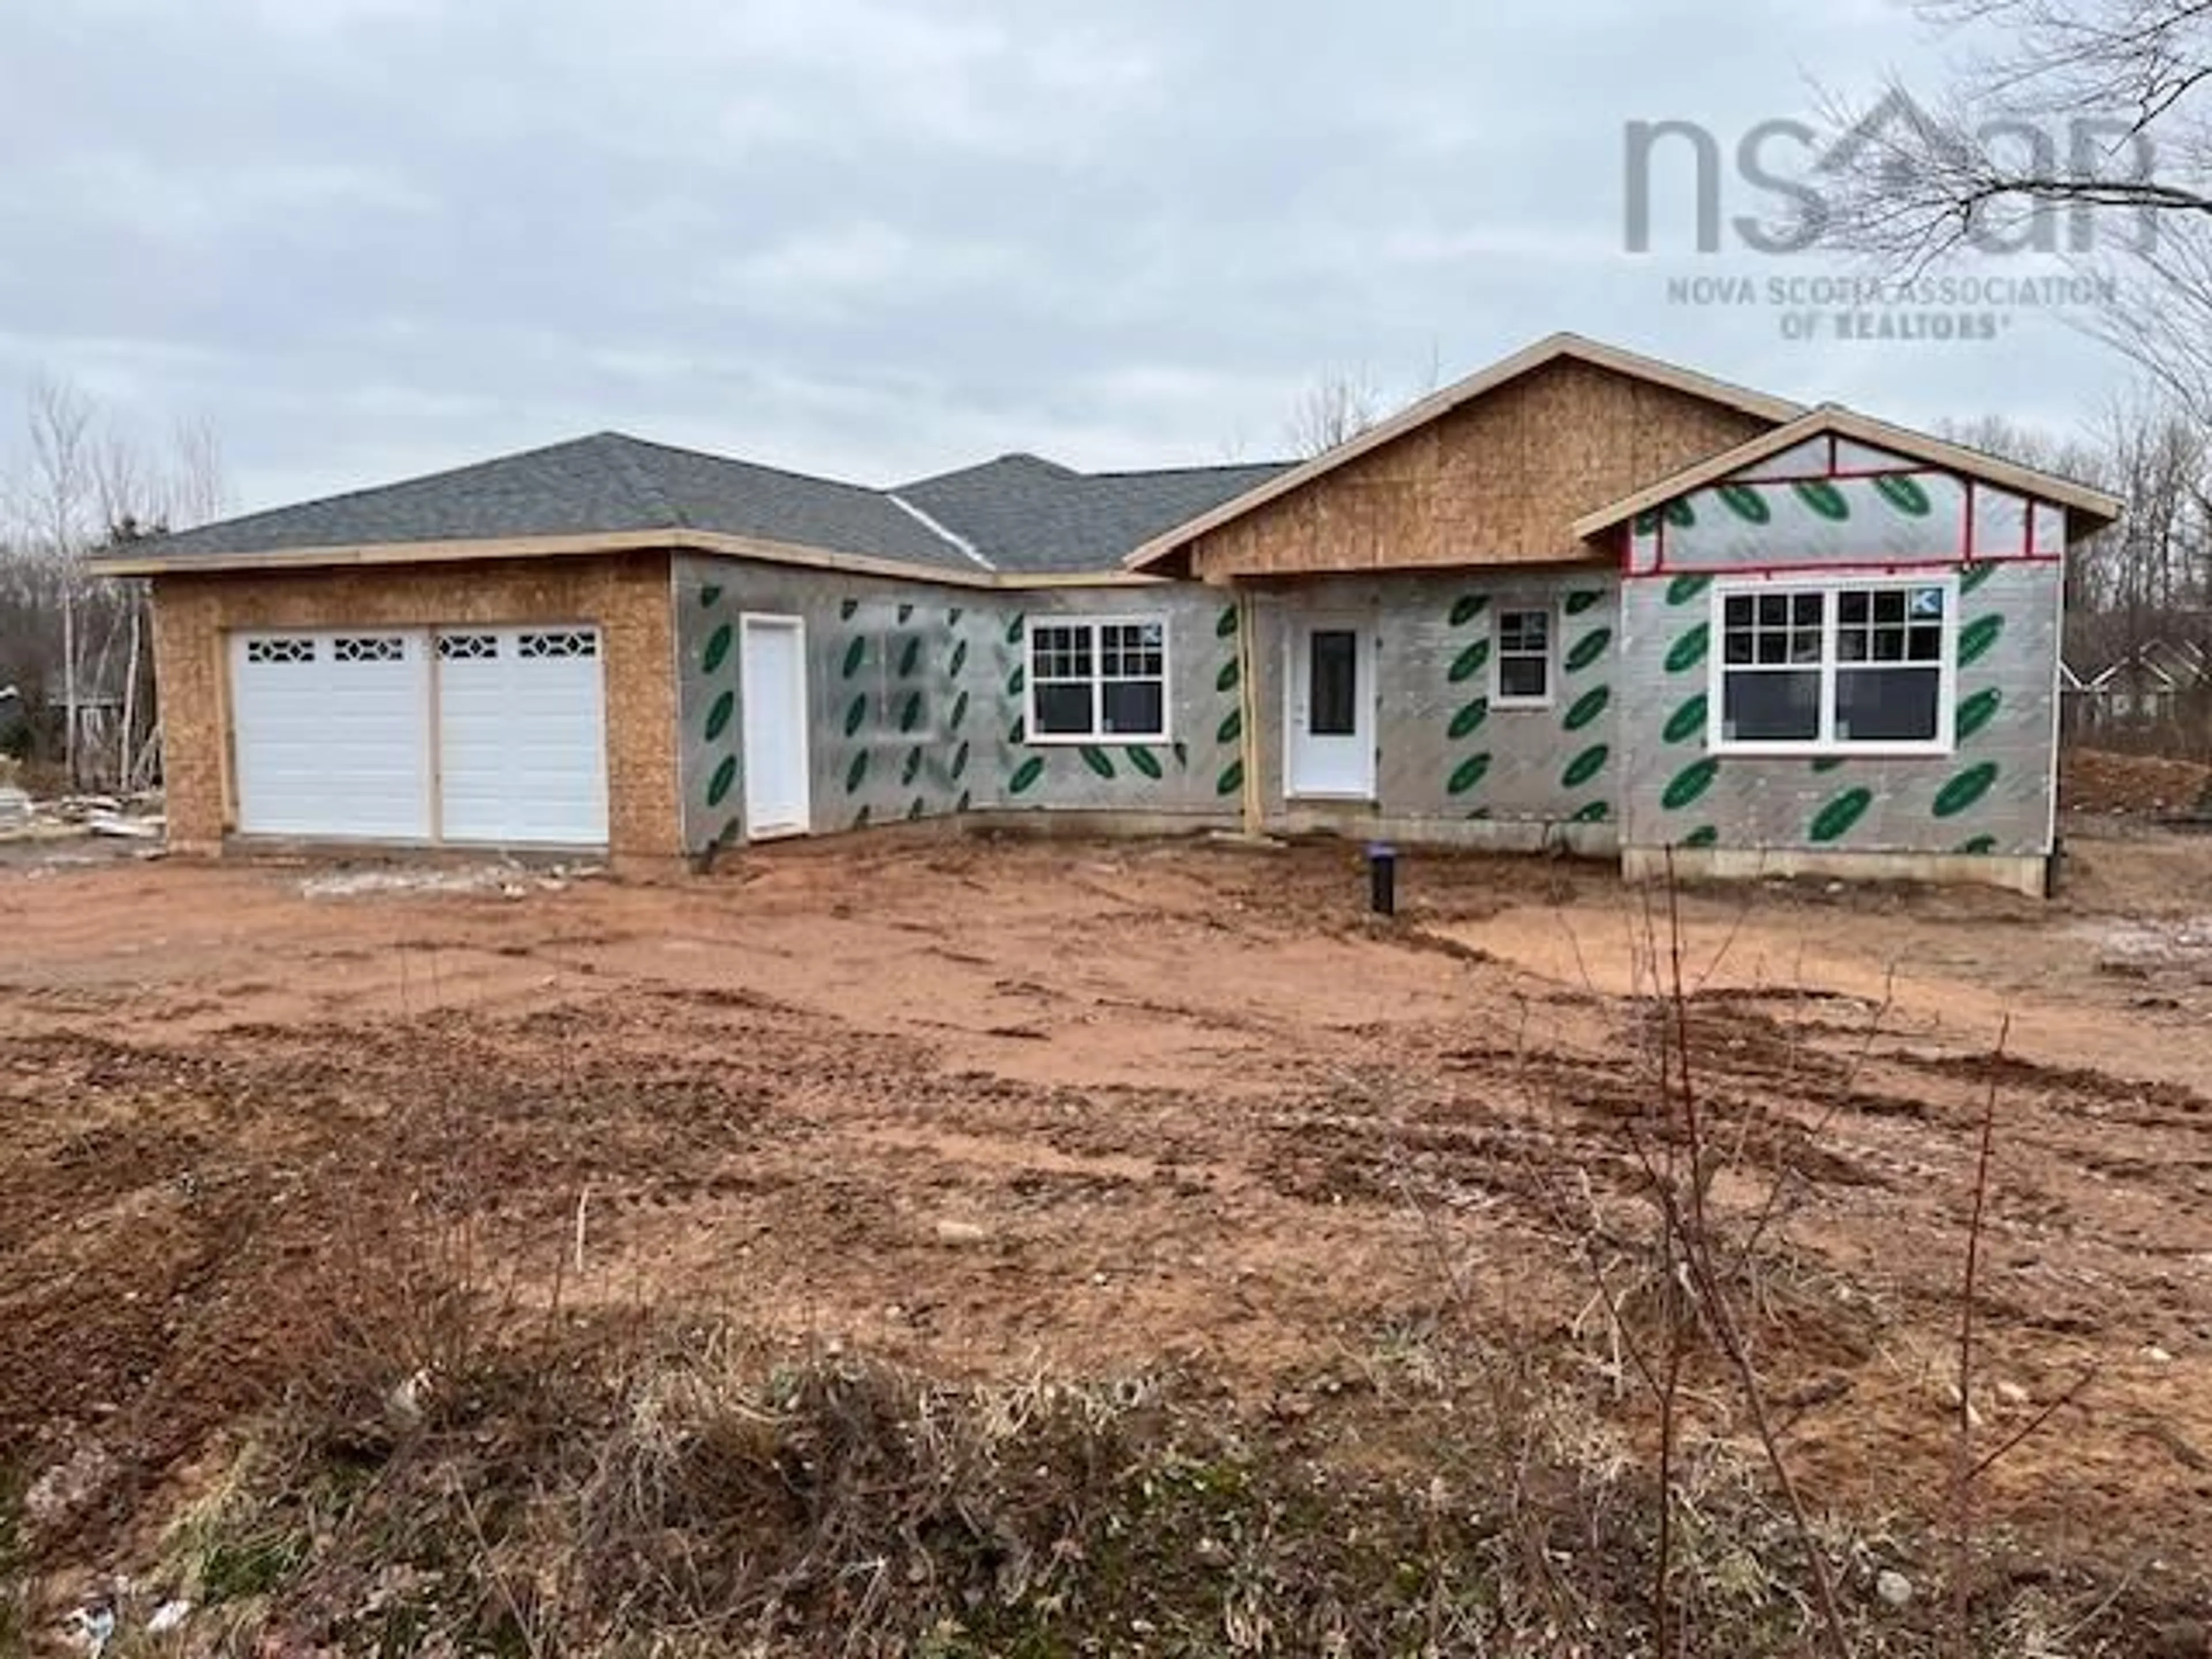 Home with stucco exterior material for Lot 32 Lacey Dr, Centreville Nova Scotia B0P 1J0